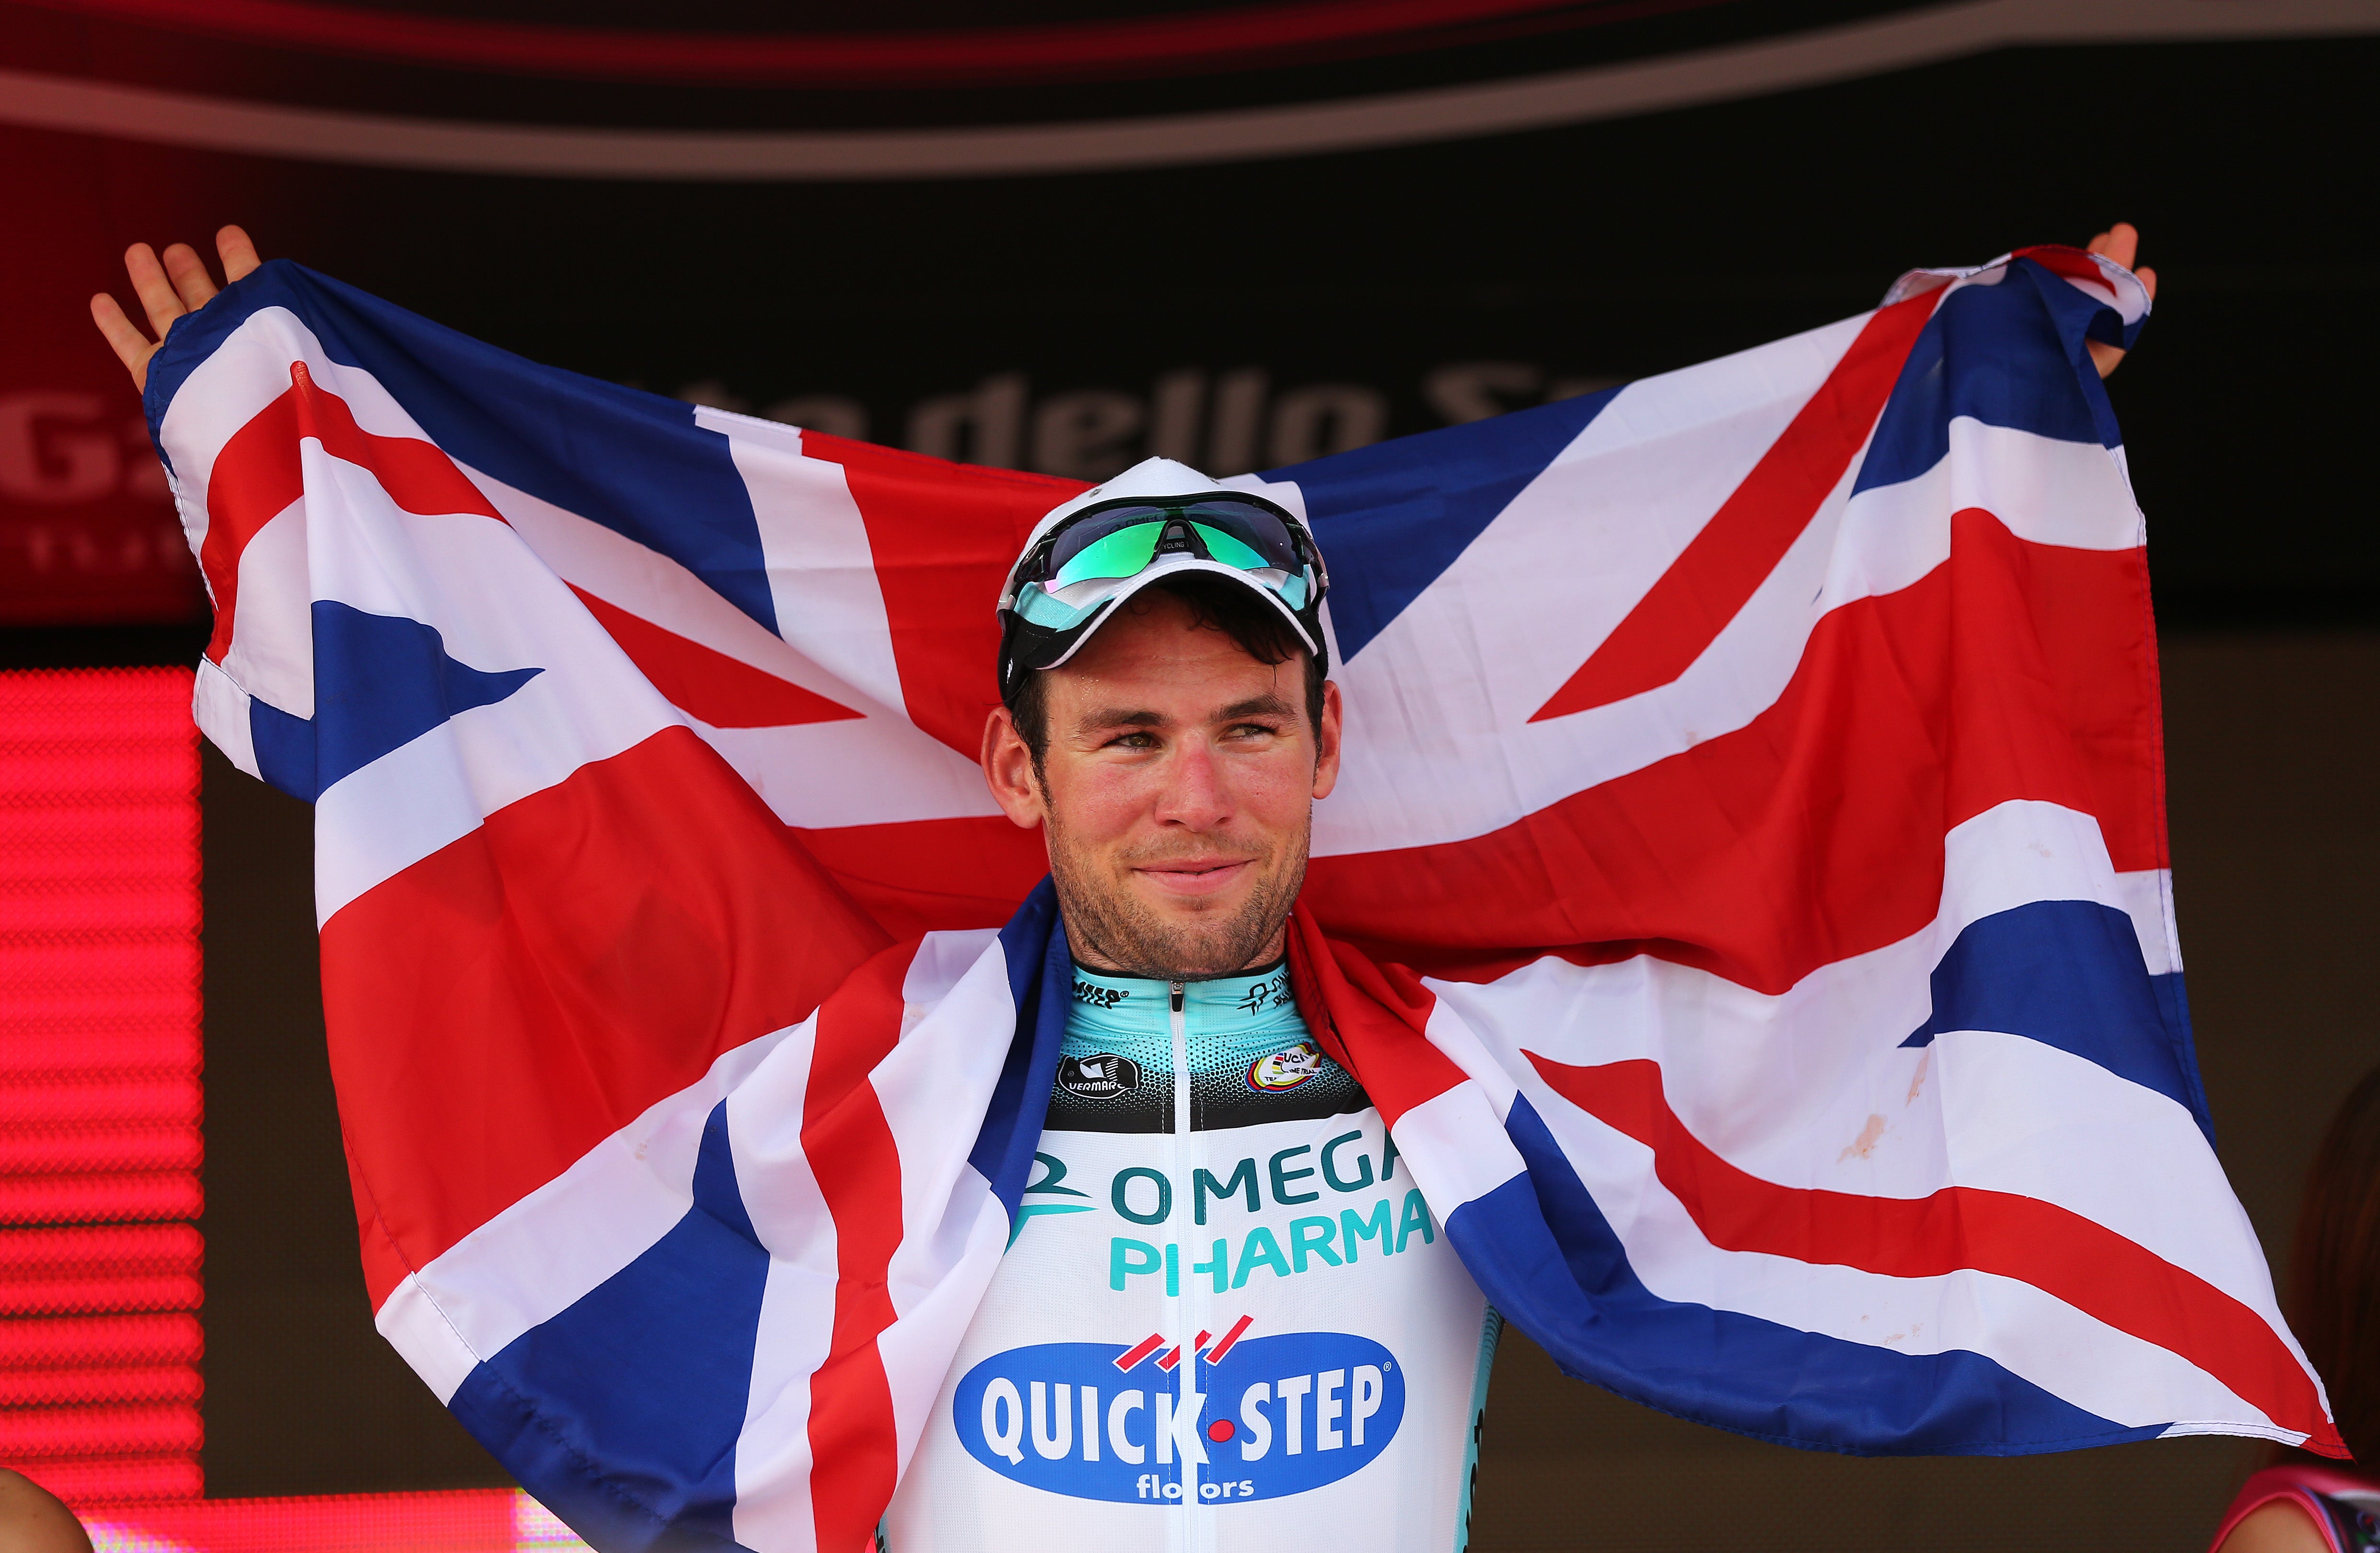 Mark Cavendish, an Olympic medallist, was unable to activate a panic alarm during the robbery